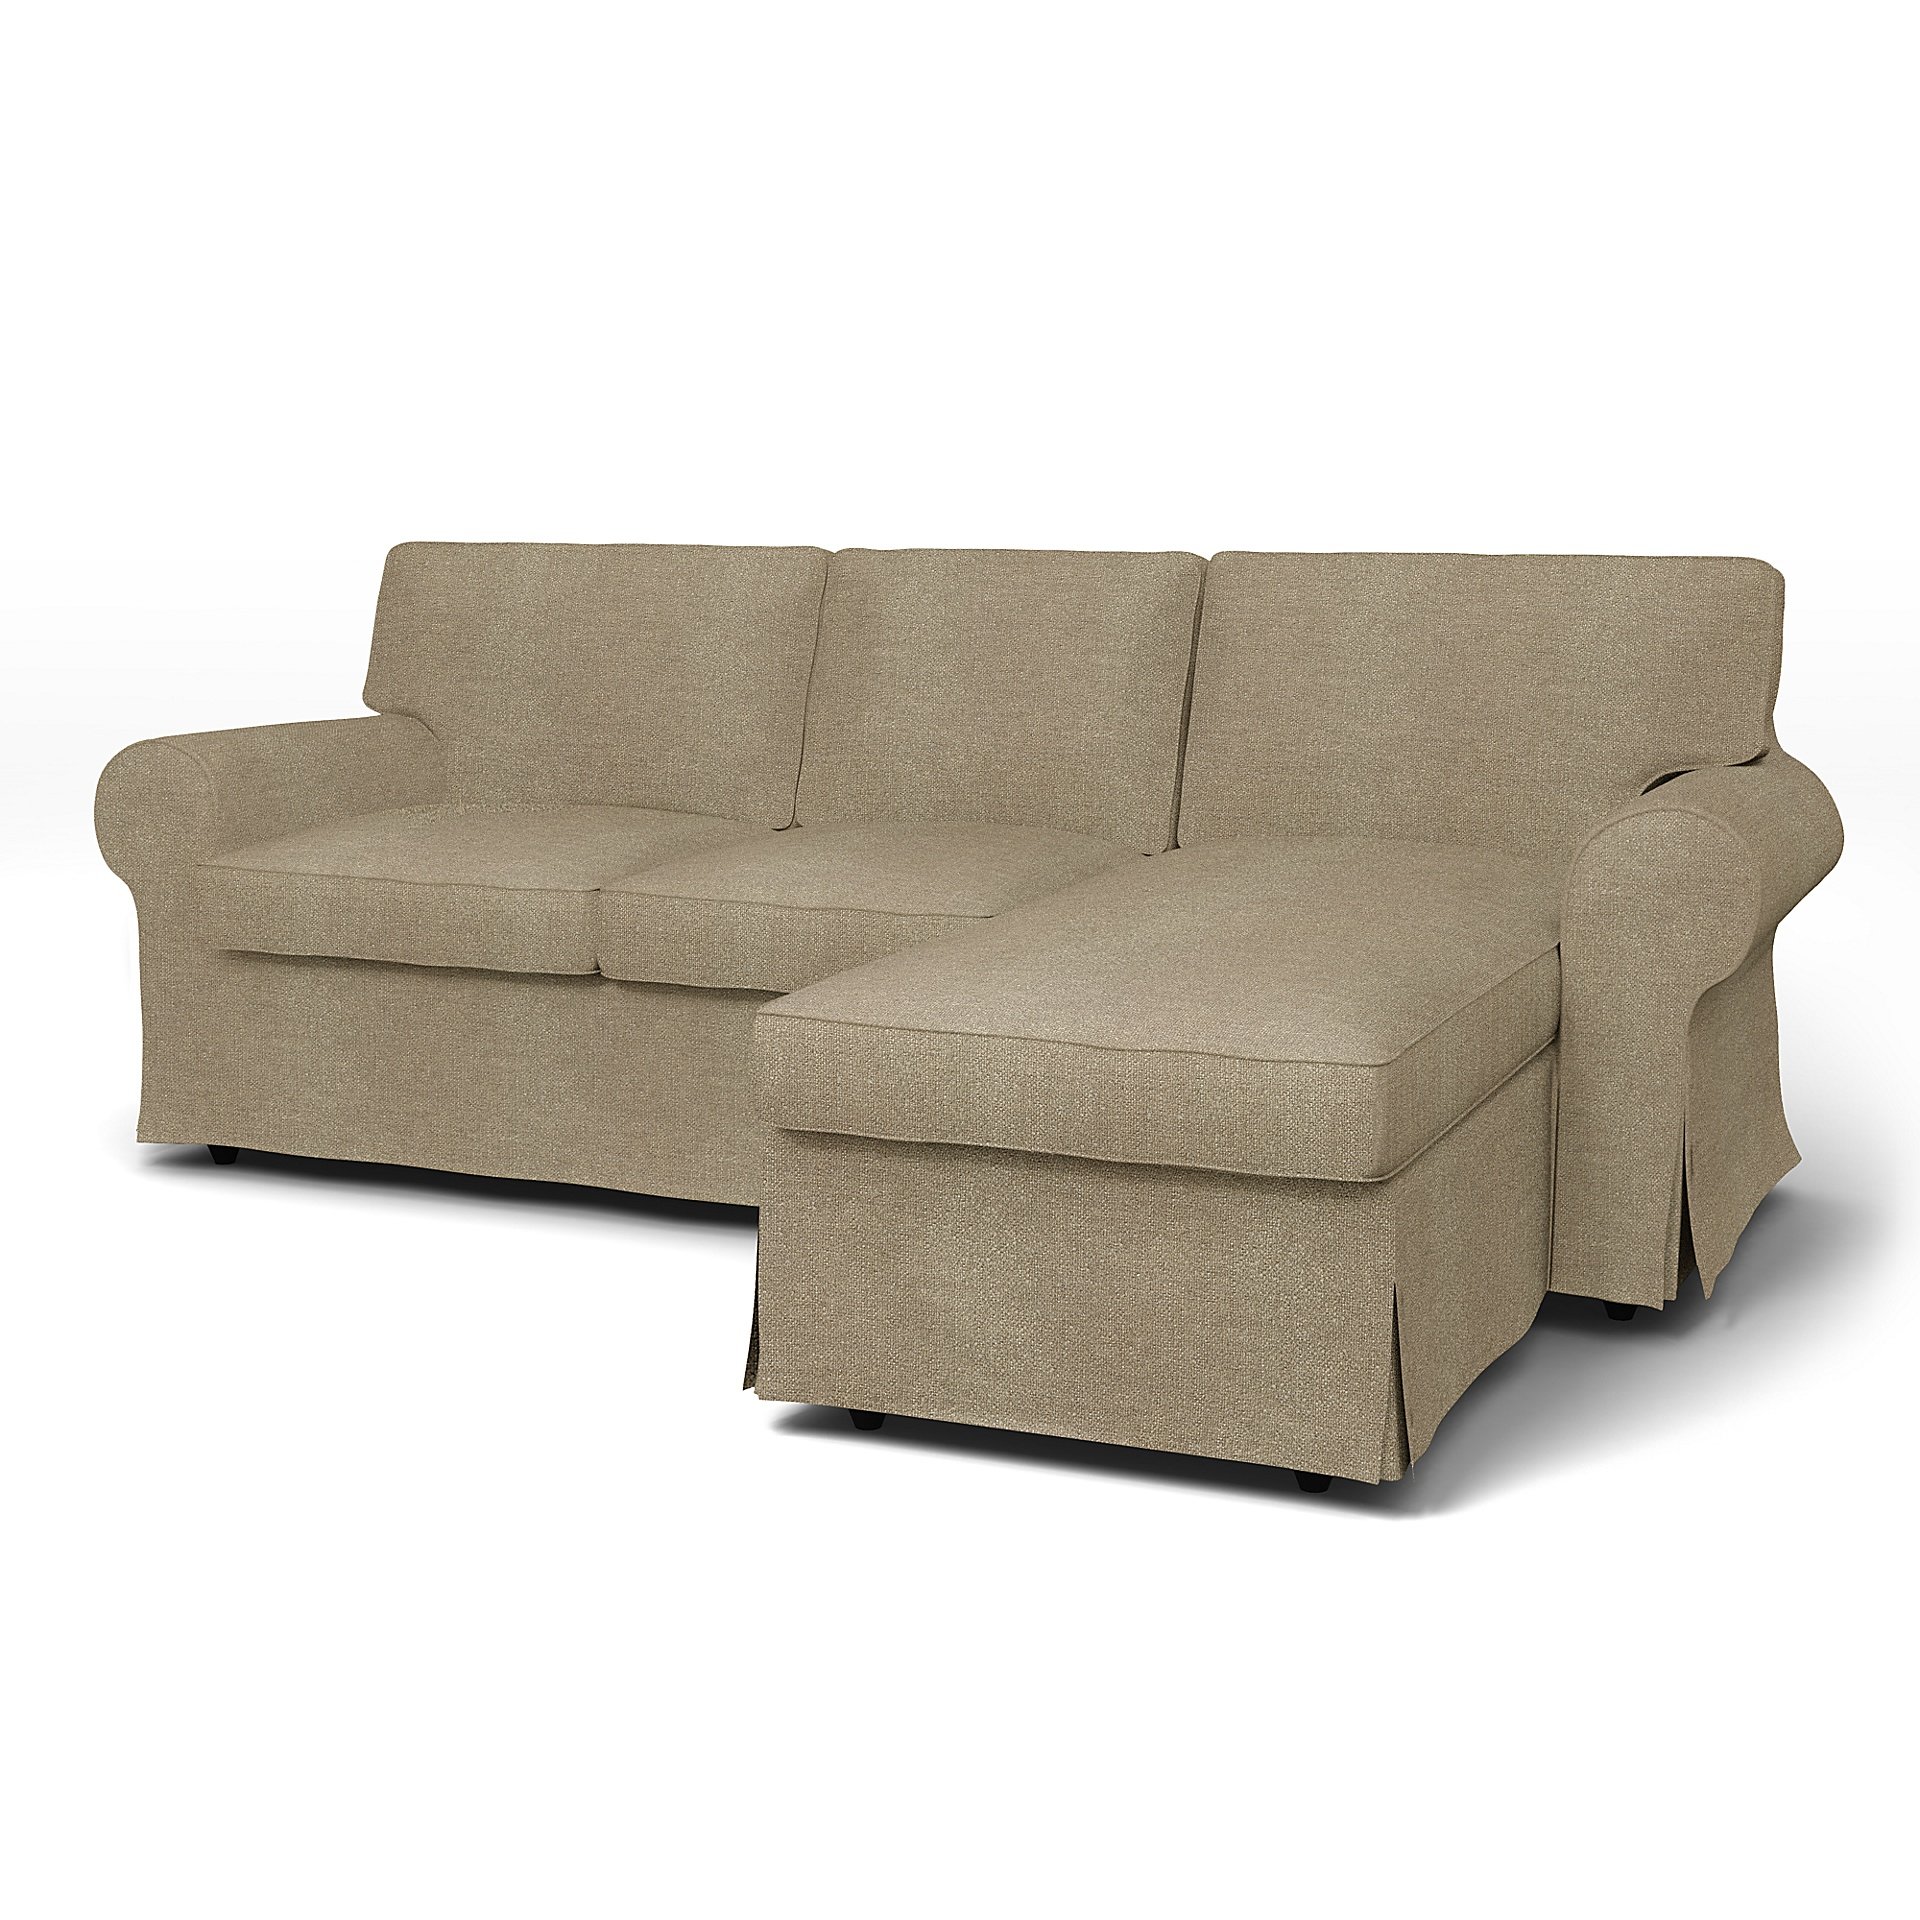 IKEA - Ektorp 3 Seater Sofa with Chaise Cover, Pebble, Boucle & Texture - Bemz